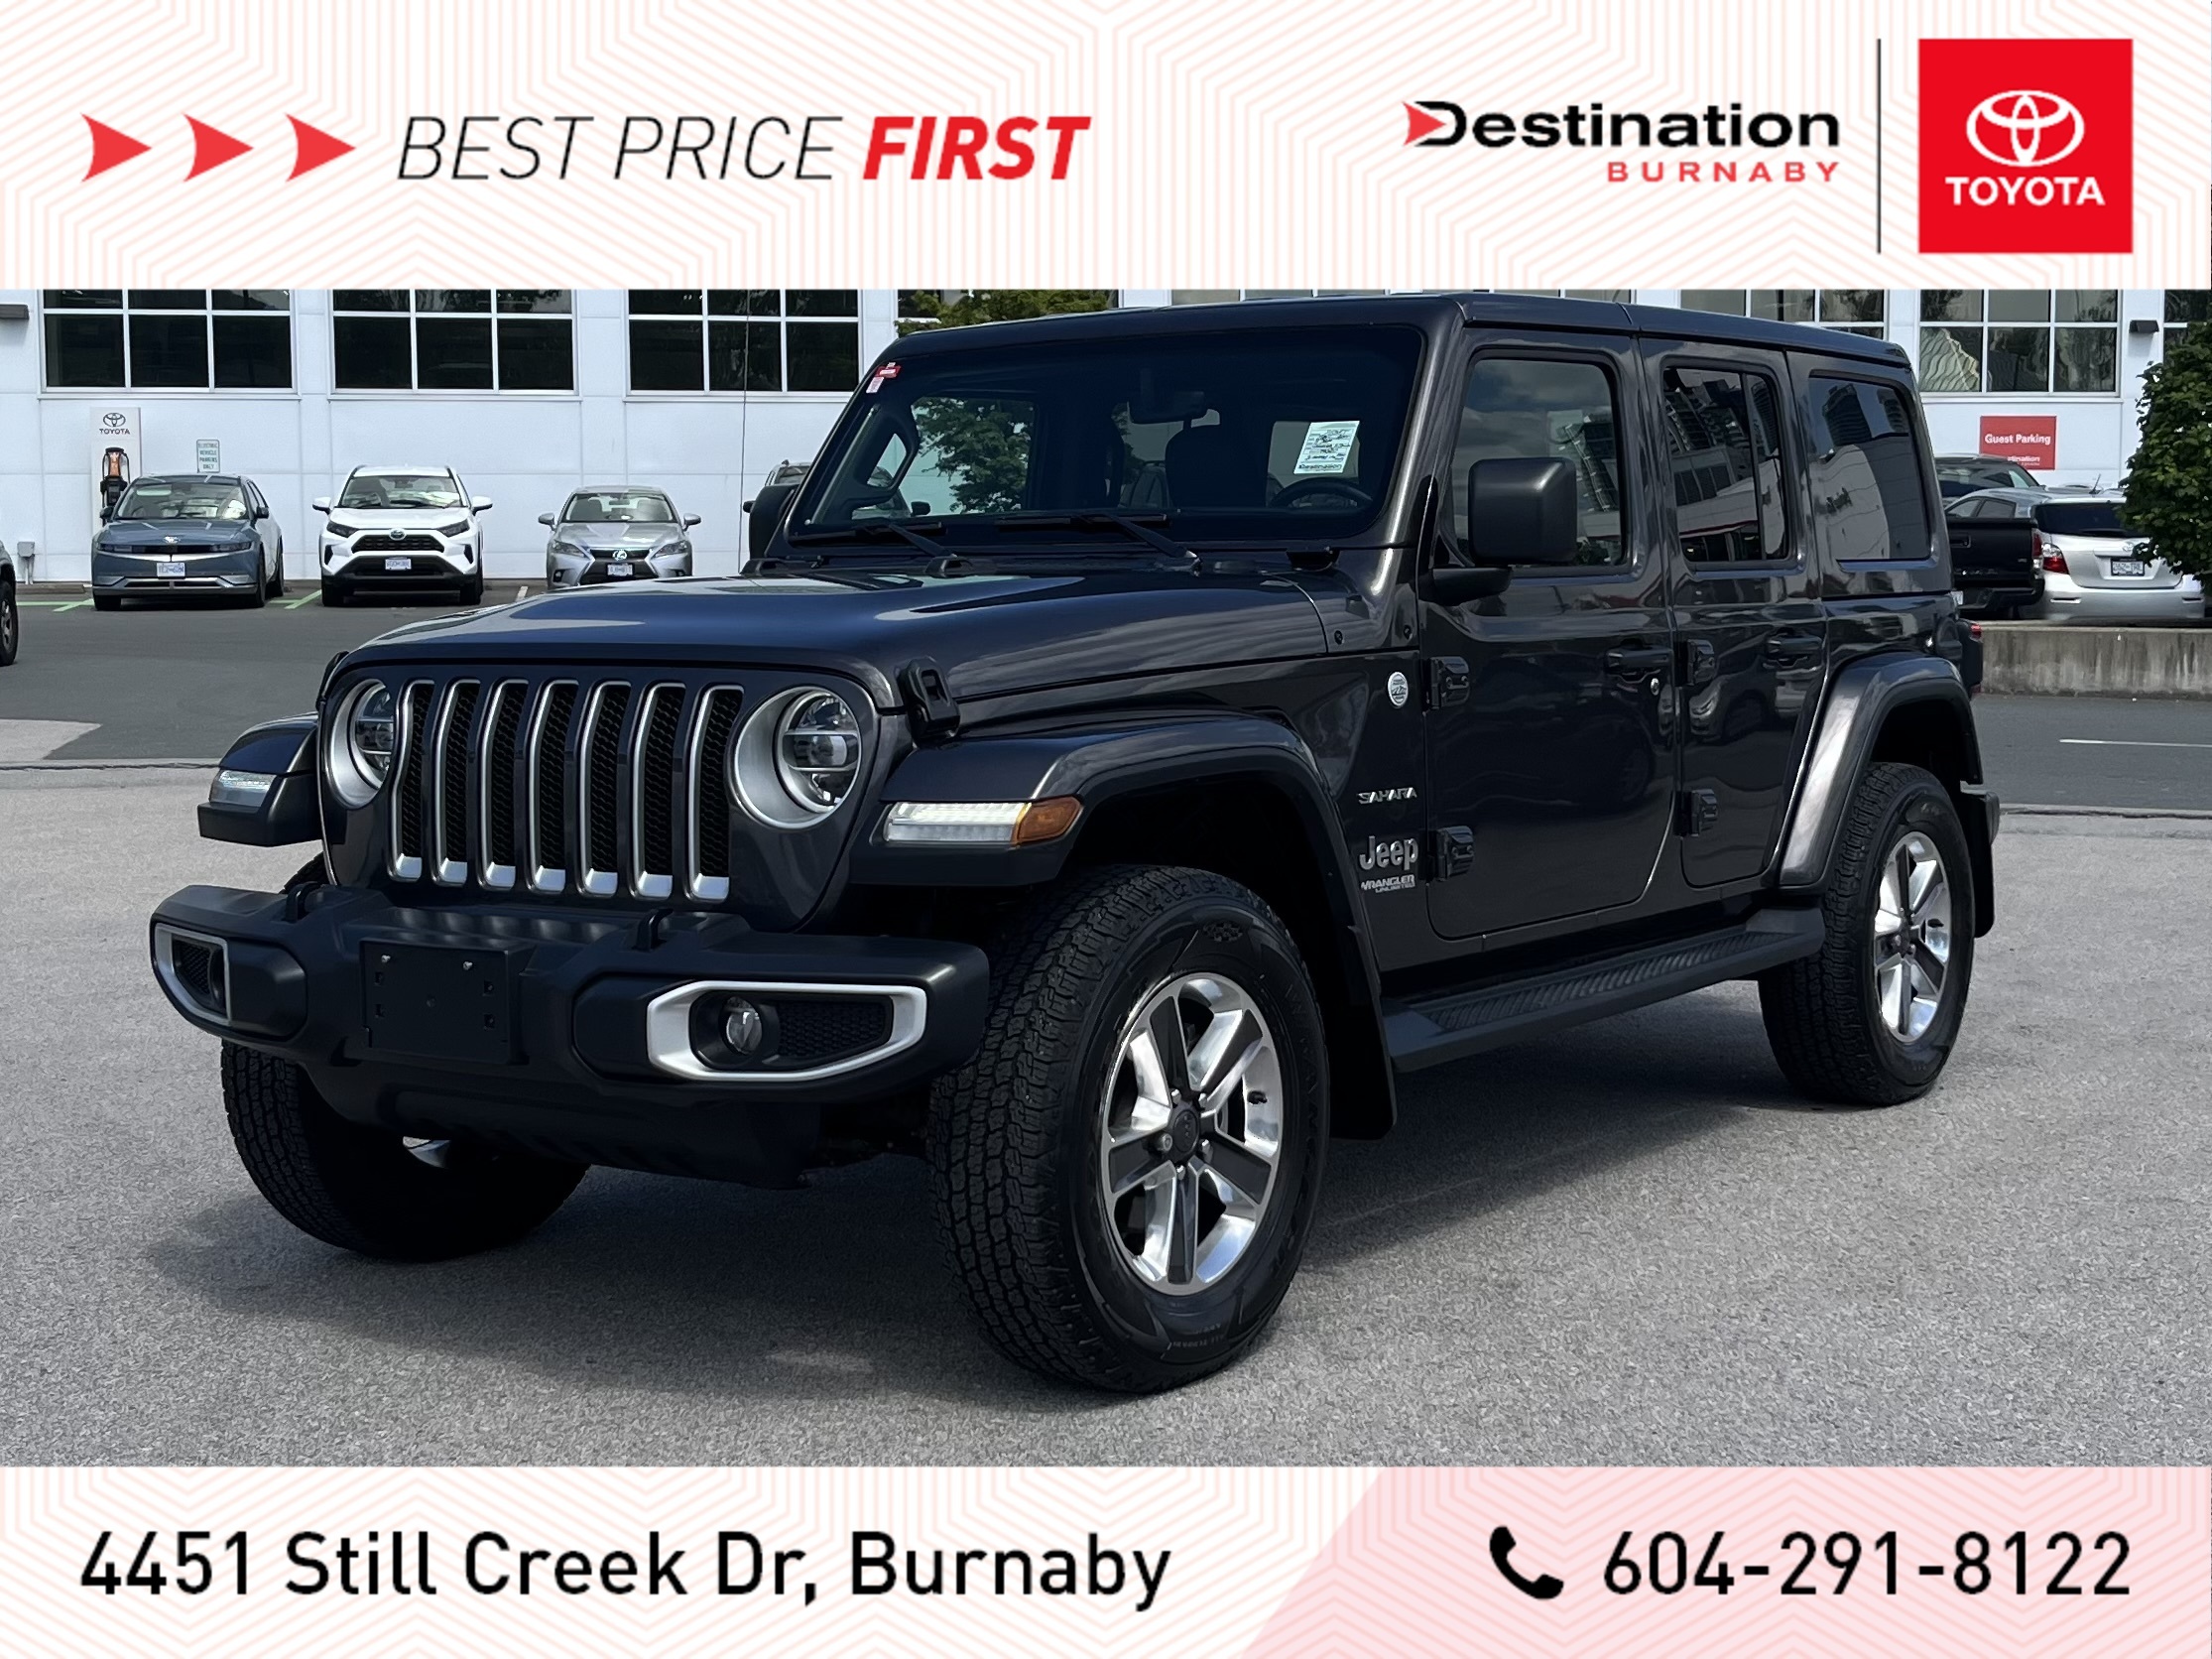 2020 Jeep WRANGLER UNLIMITED Unlimited JL Sahara, Low Kms, No accidents